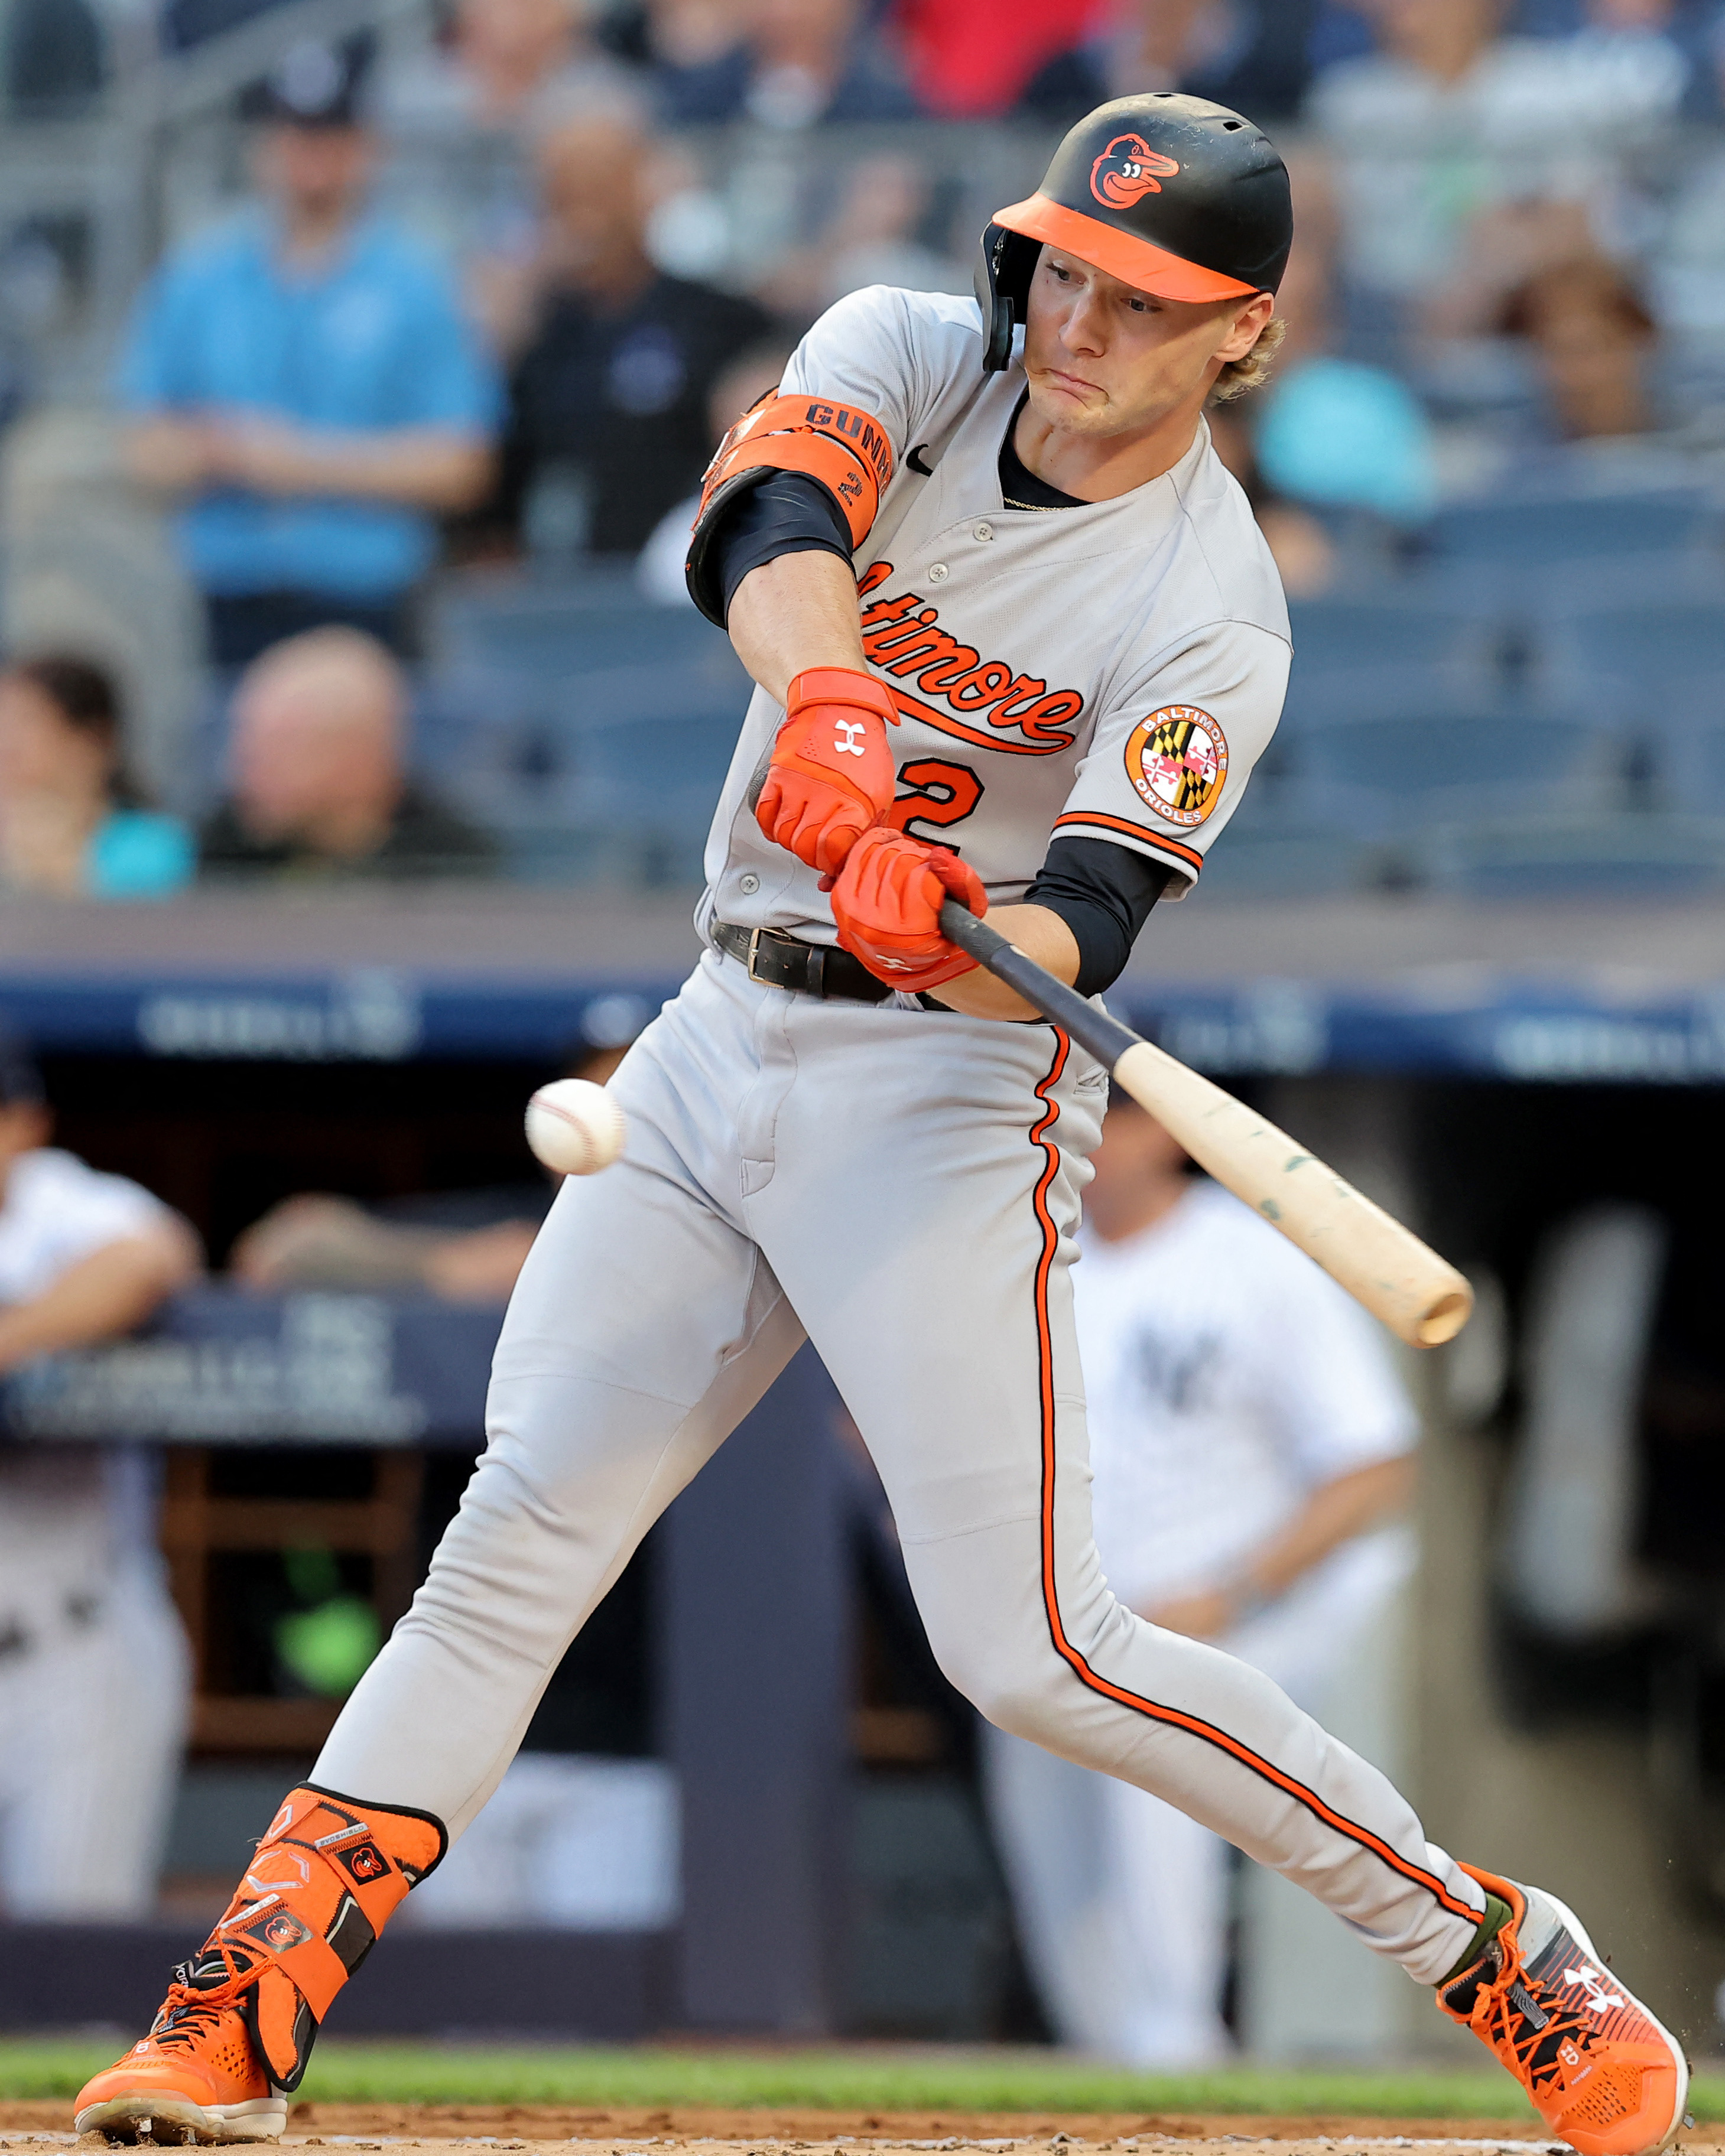 Gunnar Henderson leads O's to thumping of Yankees